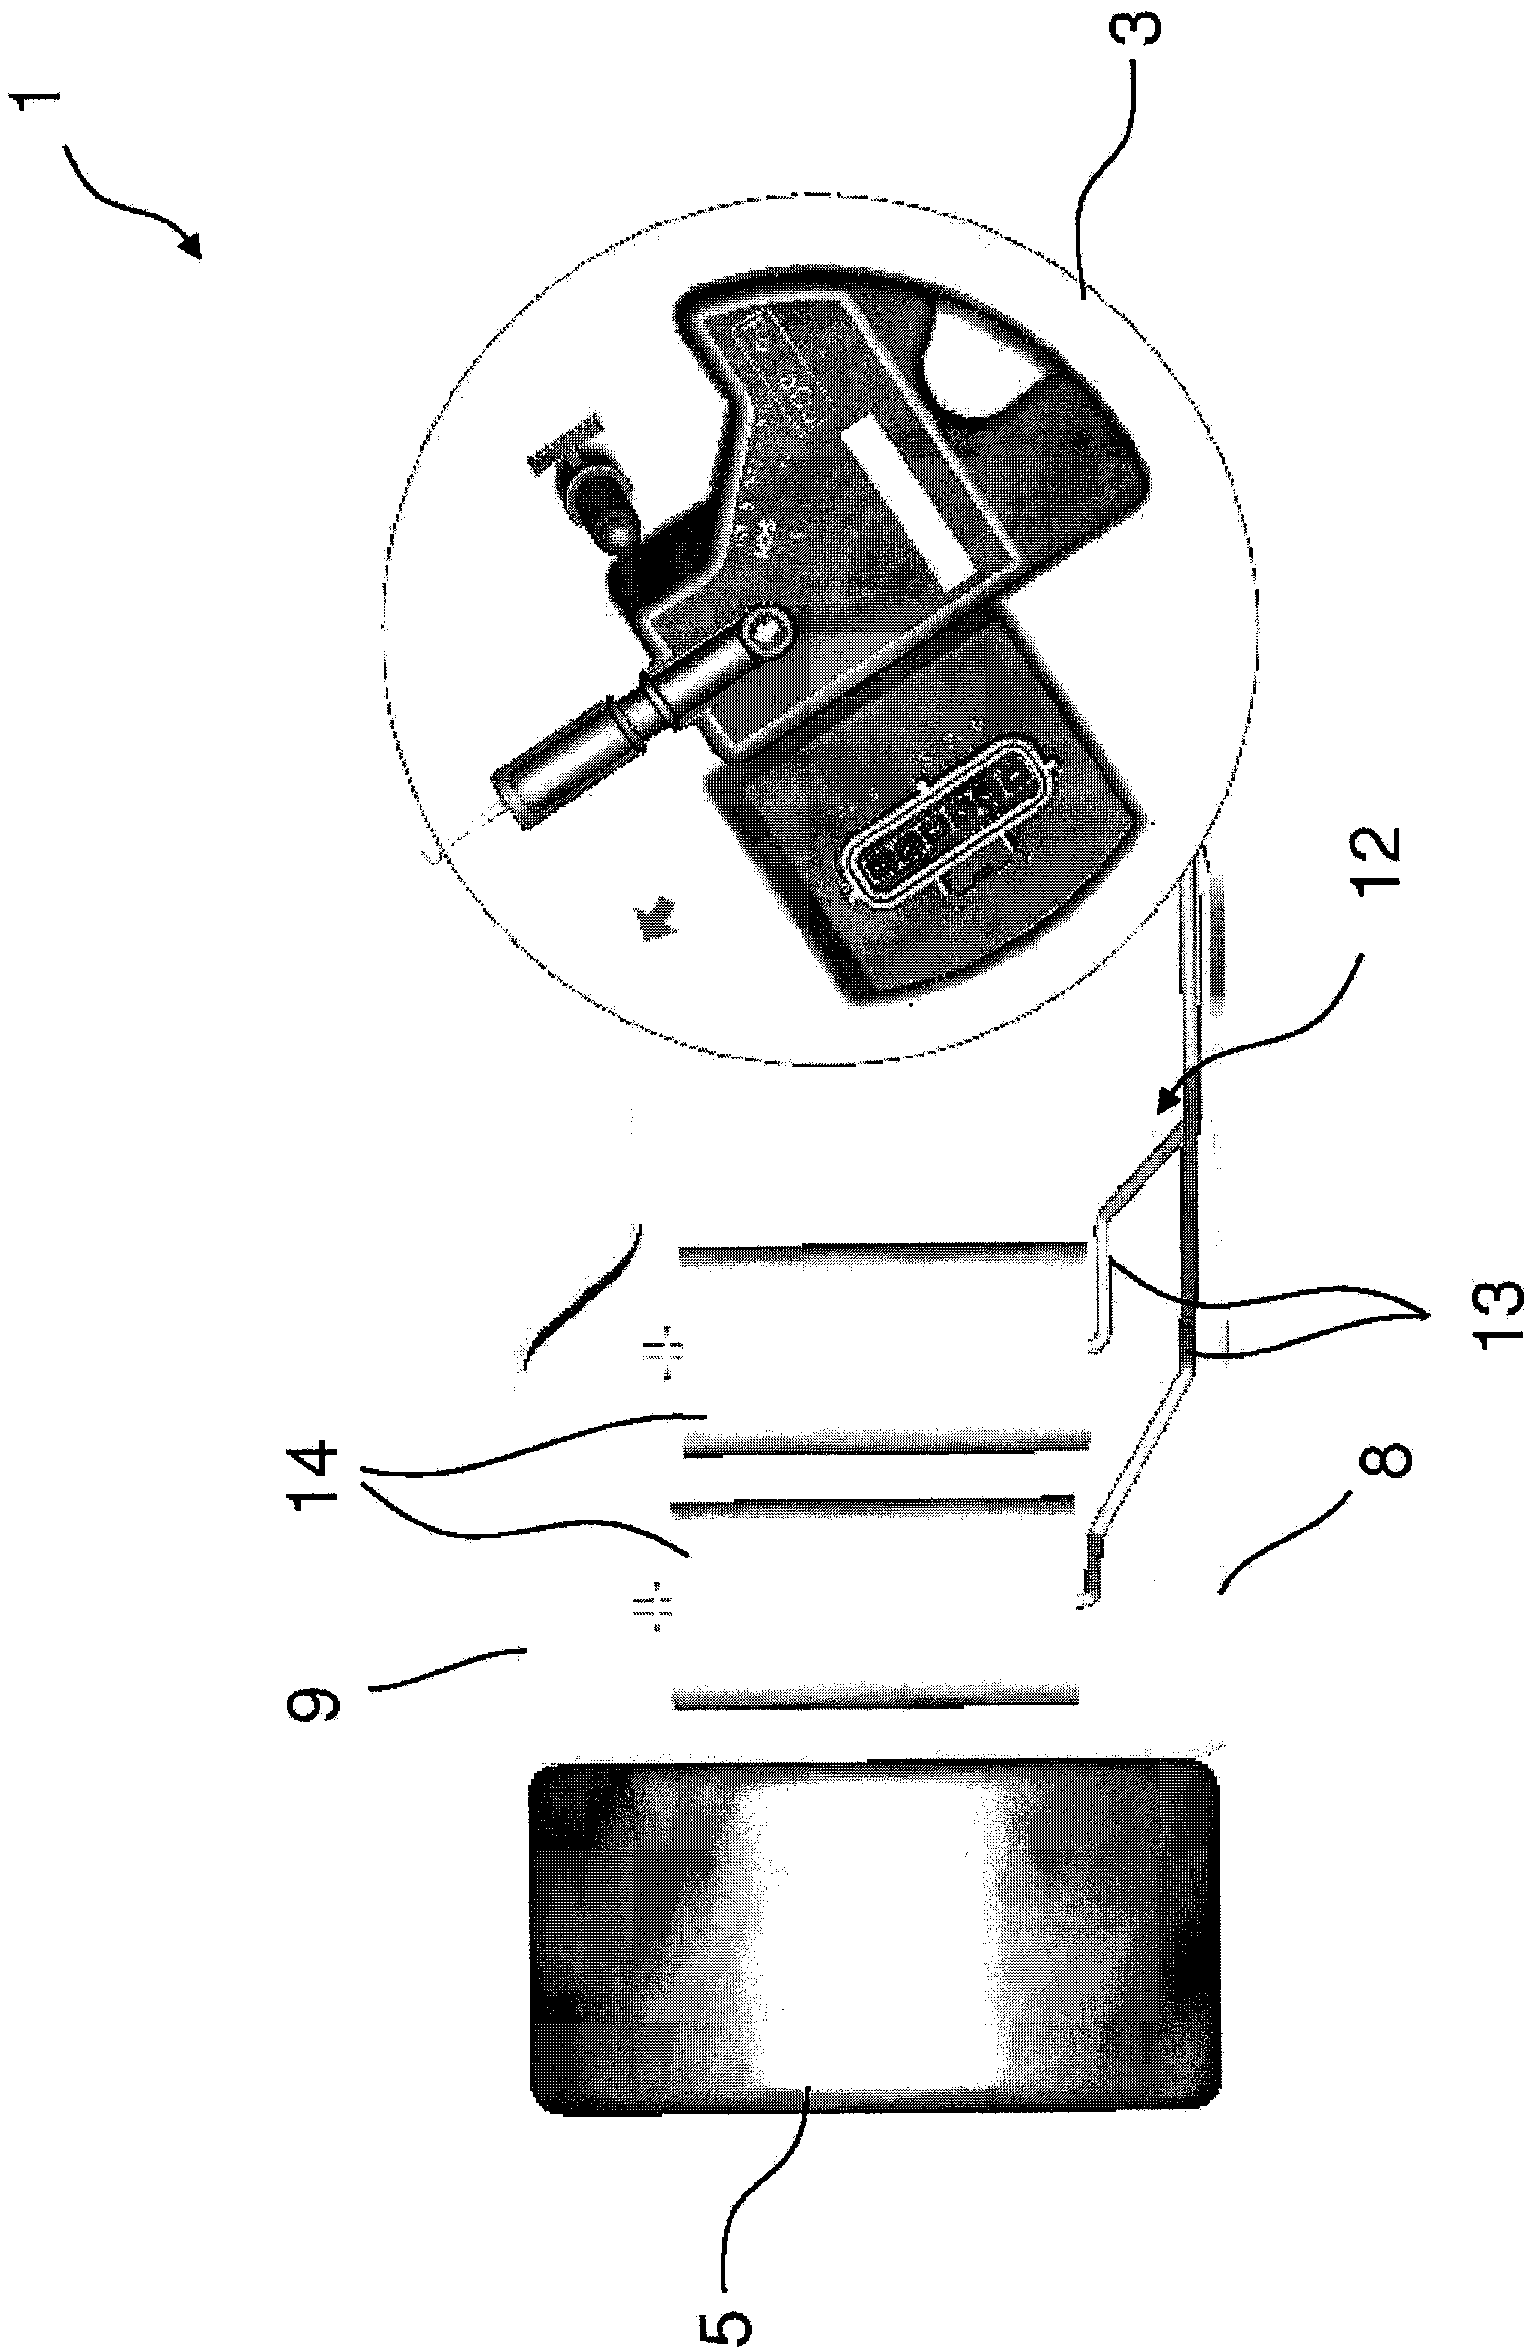 Fuel delivery module with fuel filter